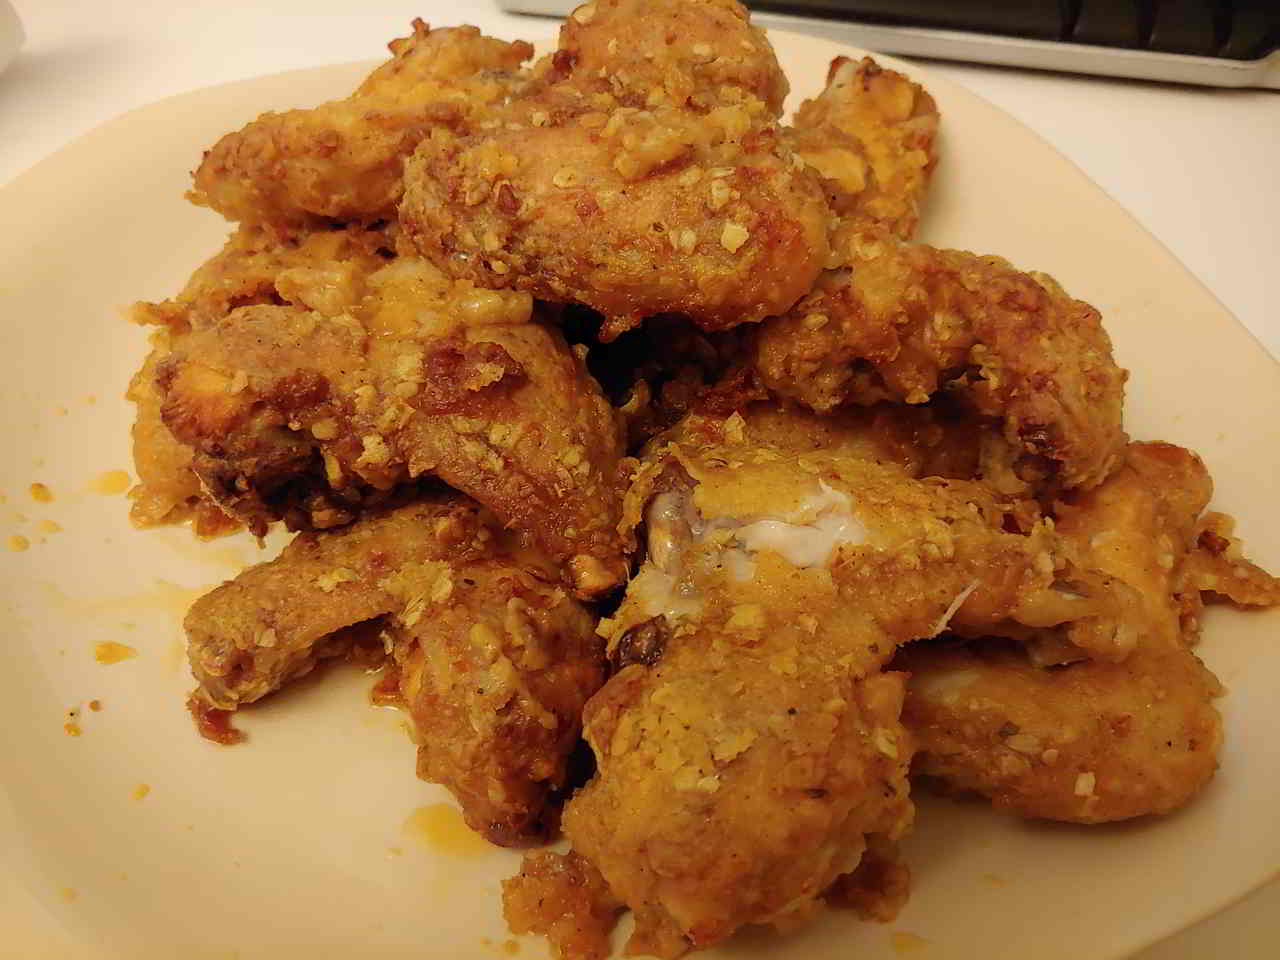 The finished product: Chicken wings!